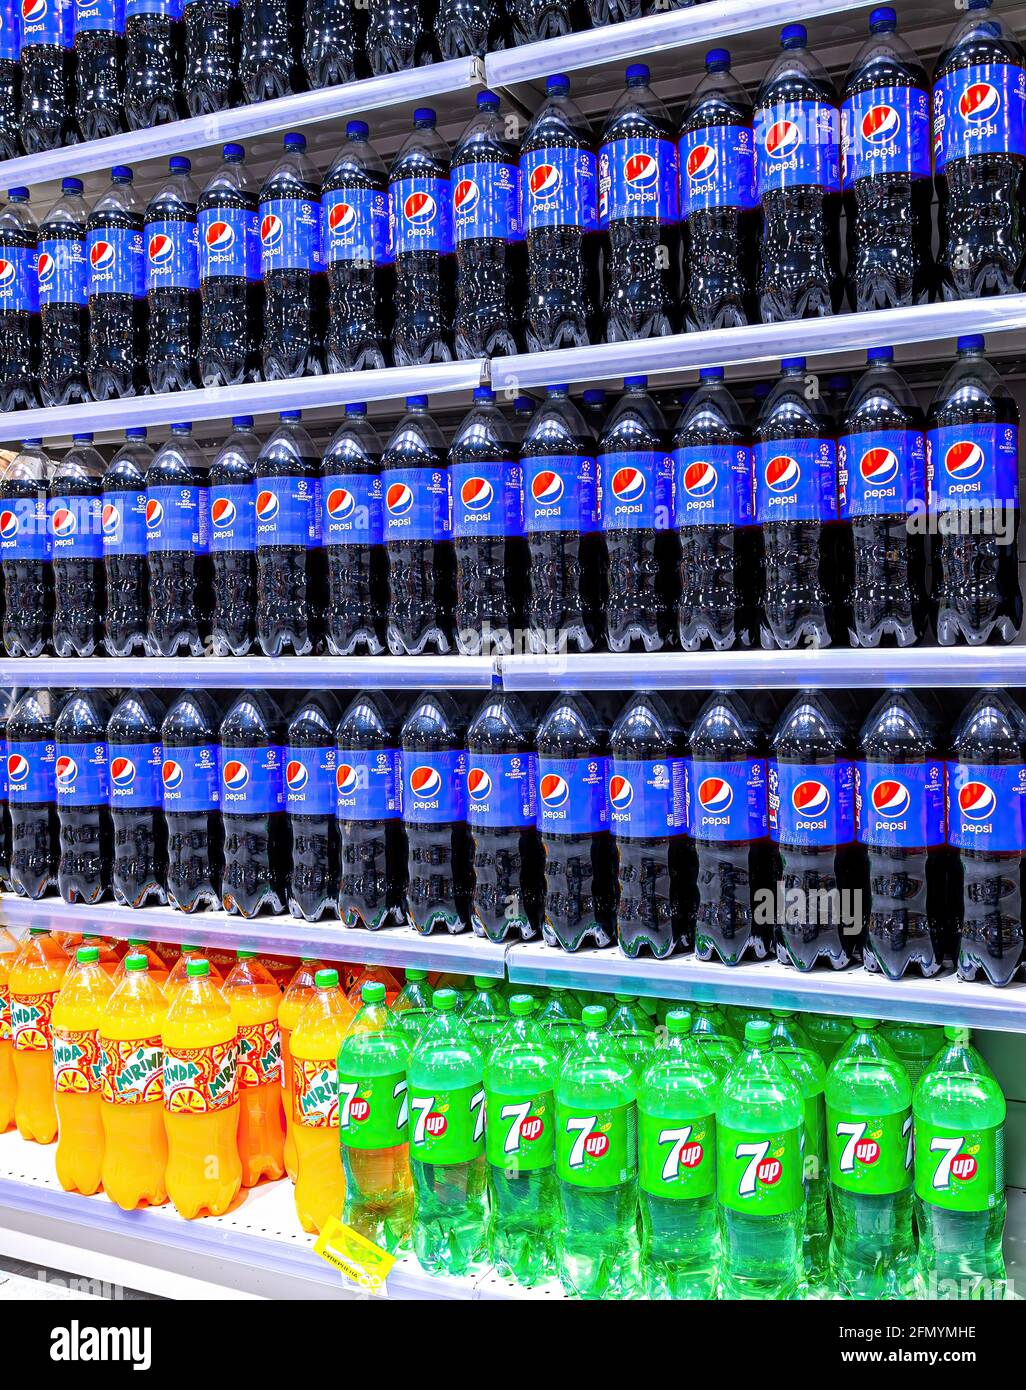 Samara, Russia - May 9, 2021: Plastic bottles of Pepsi Cola ahd other beverages on store shelf Stock Photo